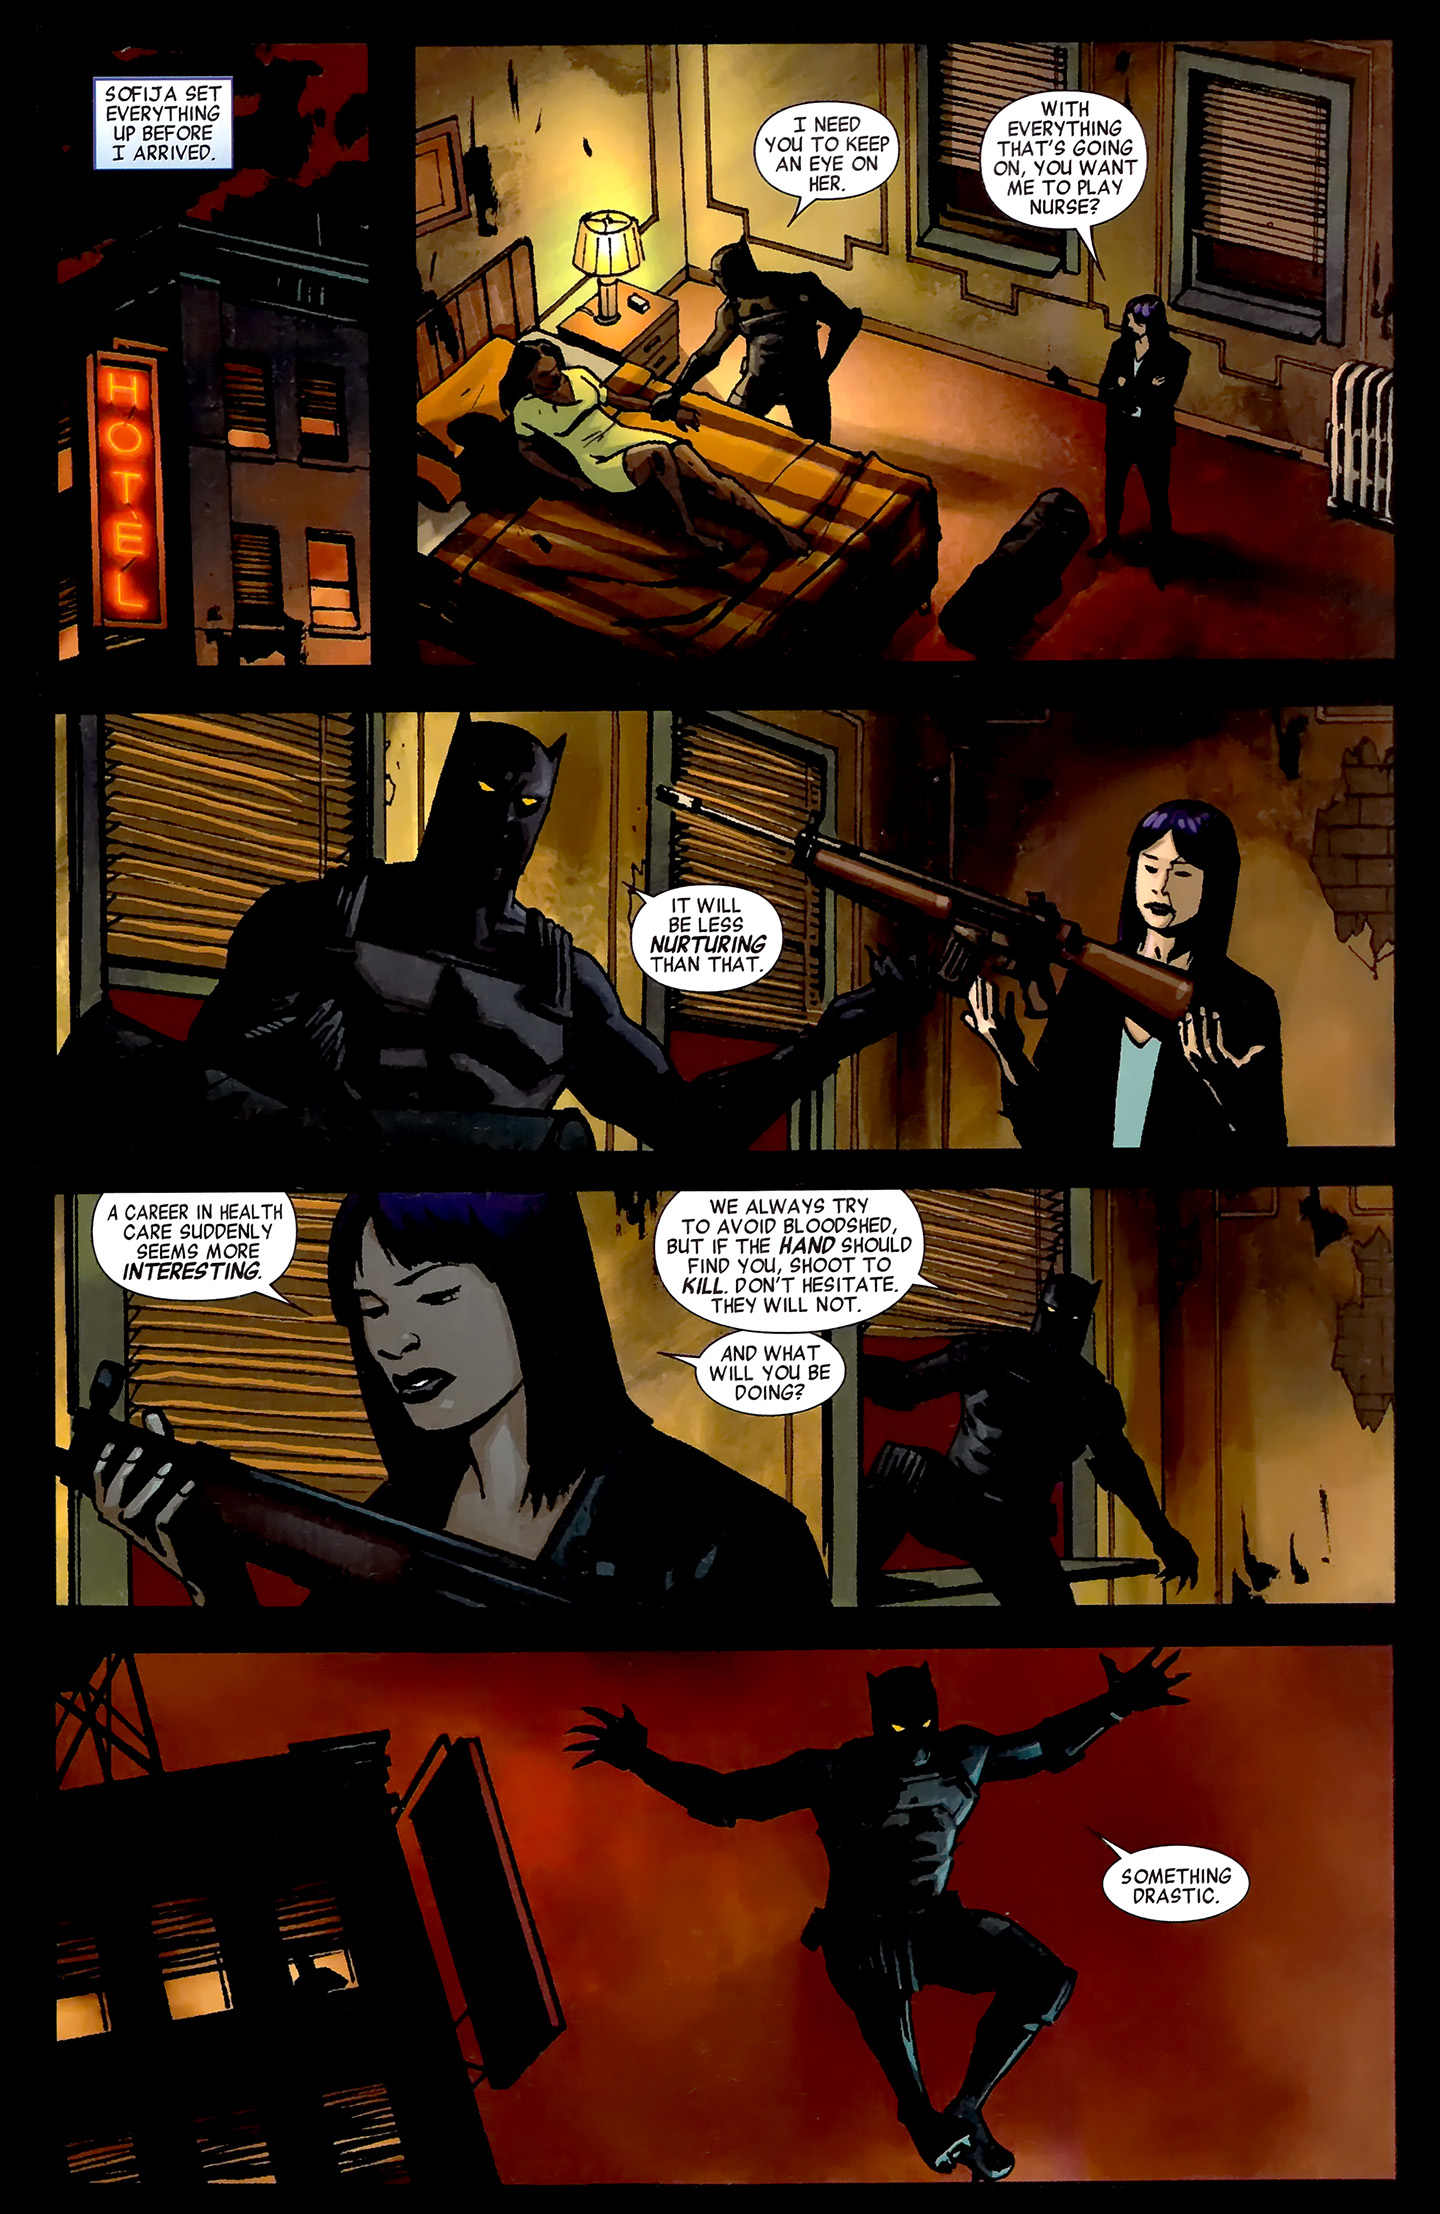 Black Panther: The Most Dangerous Man Alive 526 Page 6